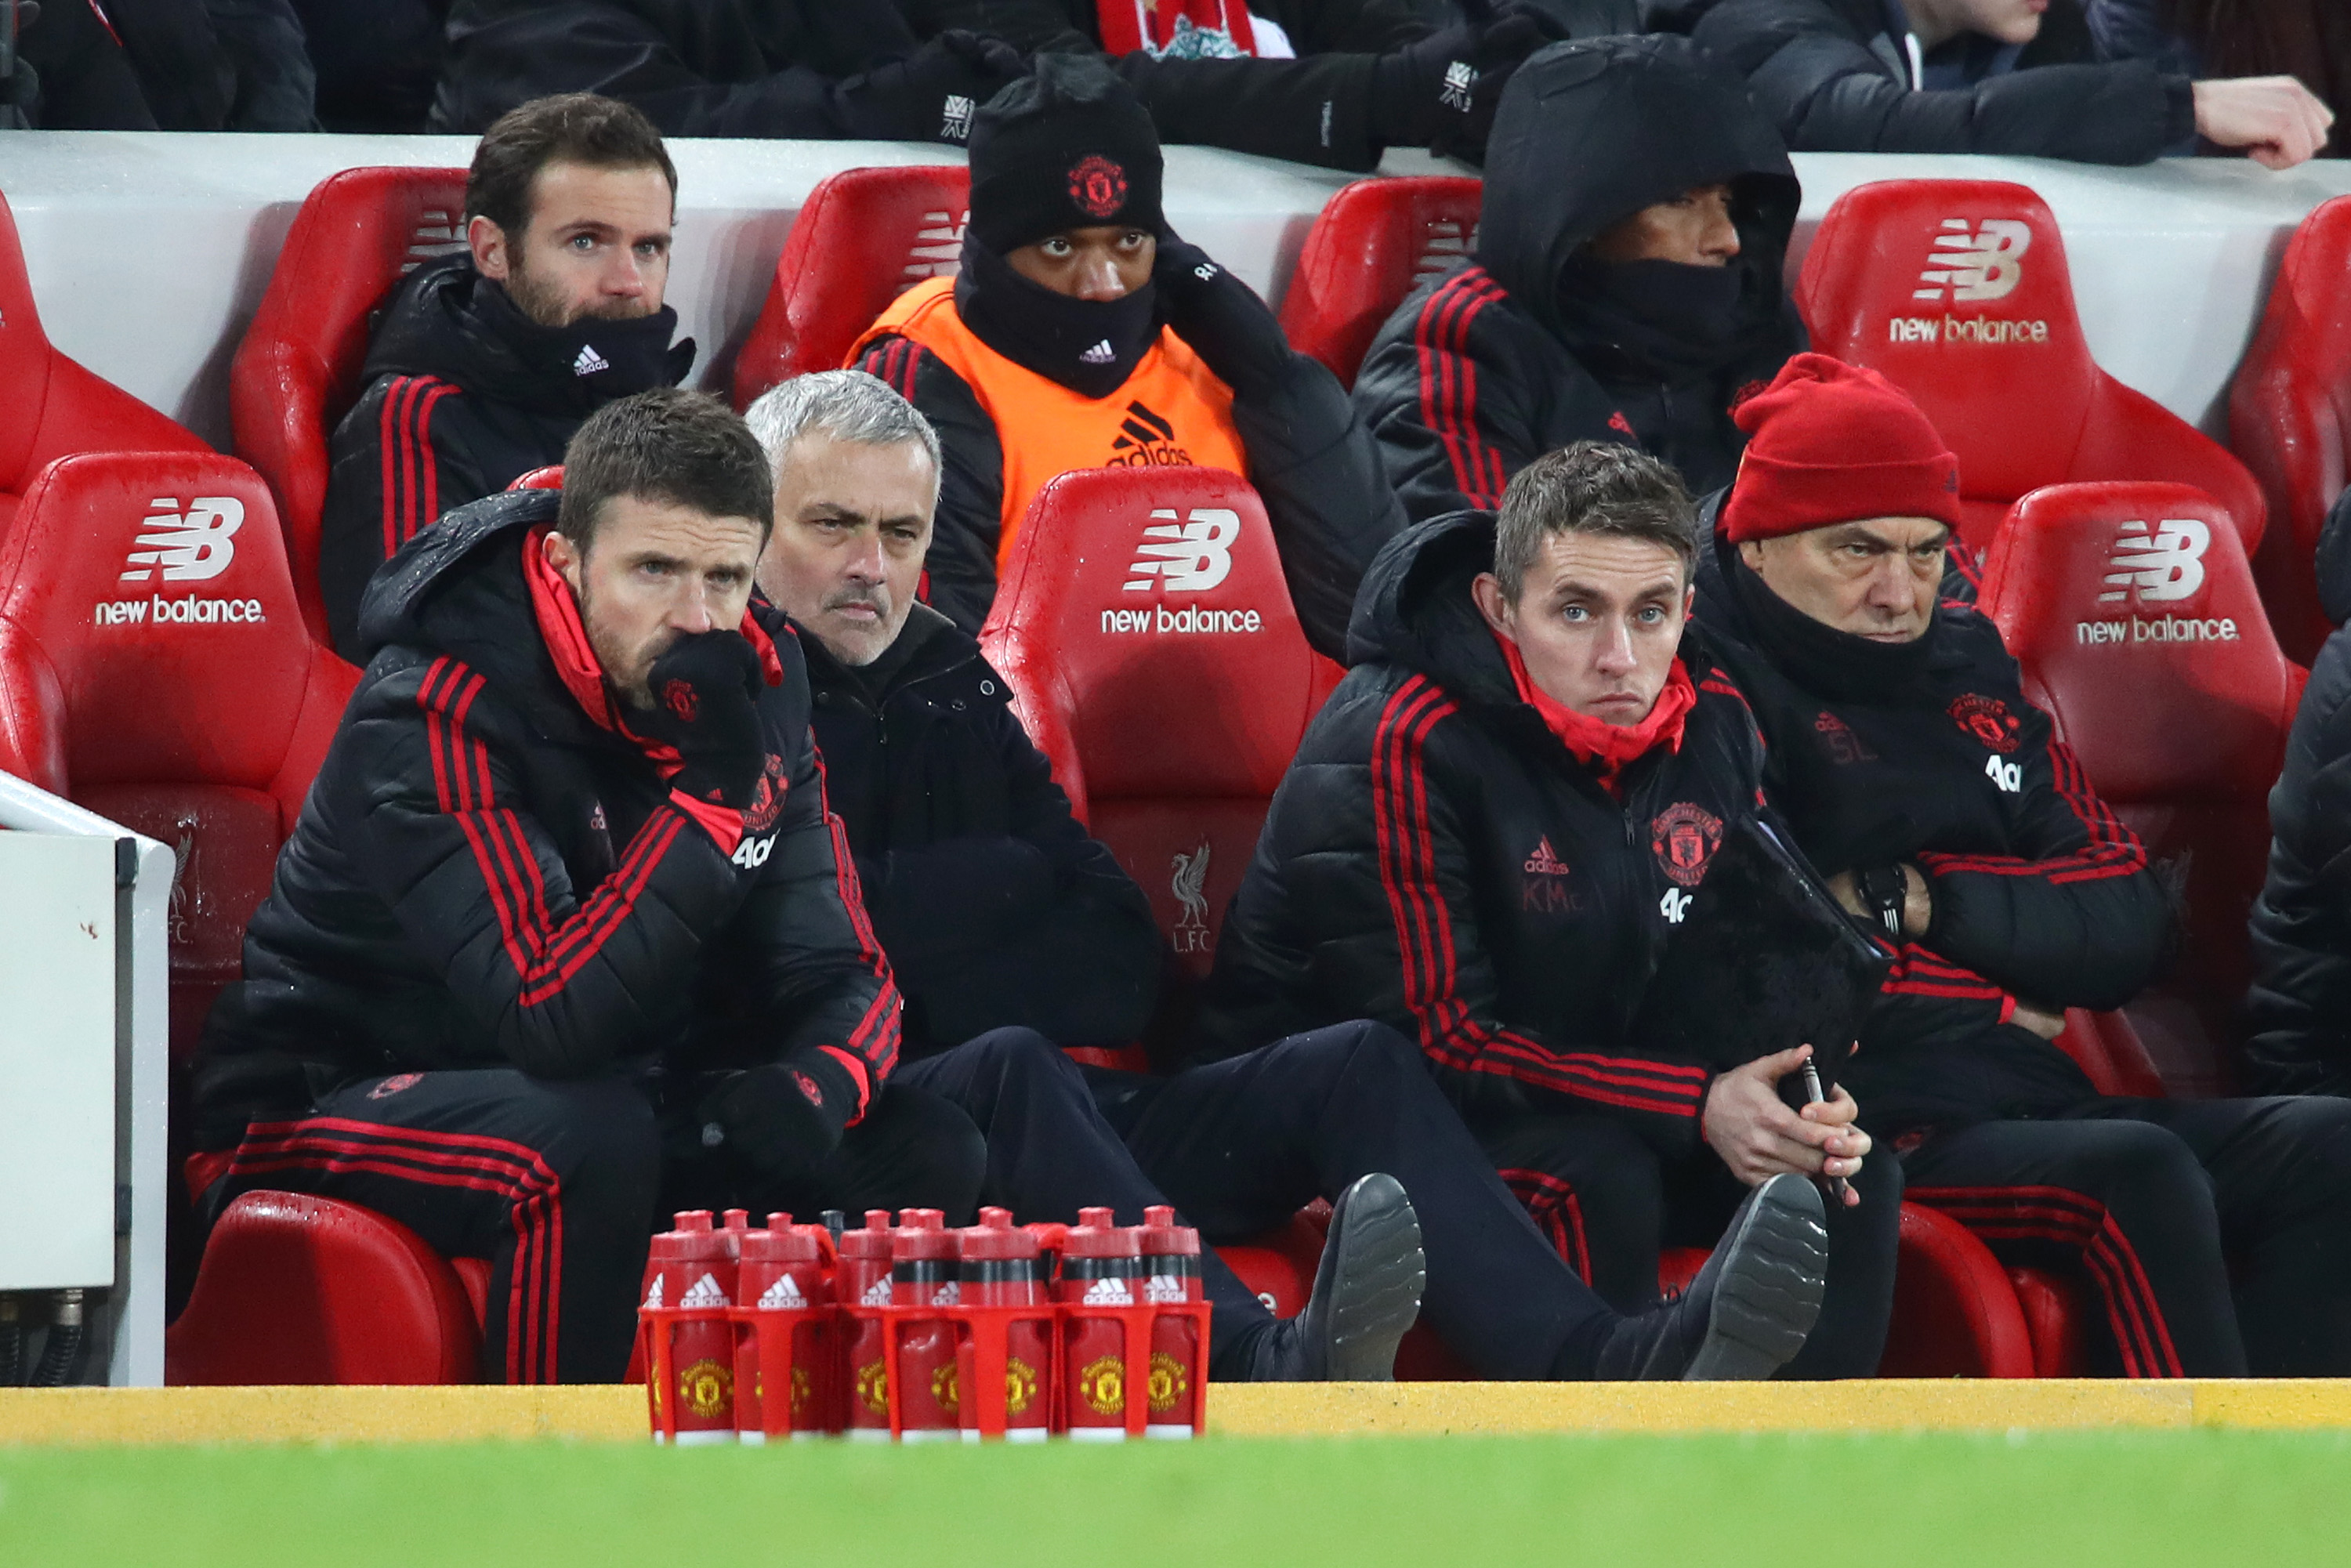 LIVERPOOL, ENGLAND - DECEMBER 16:  Jose Mourinho, Manager of Manchester United looks on during the Premier League match between Liverpool FC and Manchester United at Anfield on December 16, 2018 in Liverpool, United Kingdom.  (Photo by Clive Brunskill/Getty Images)